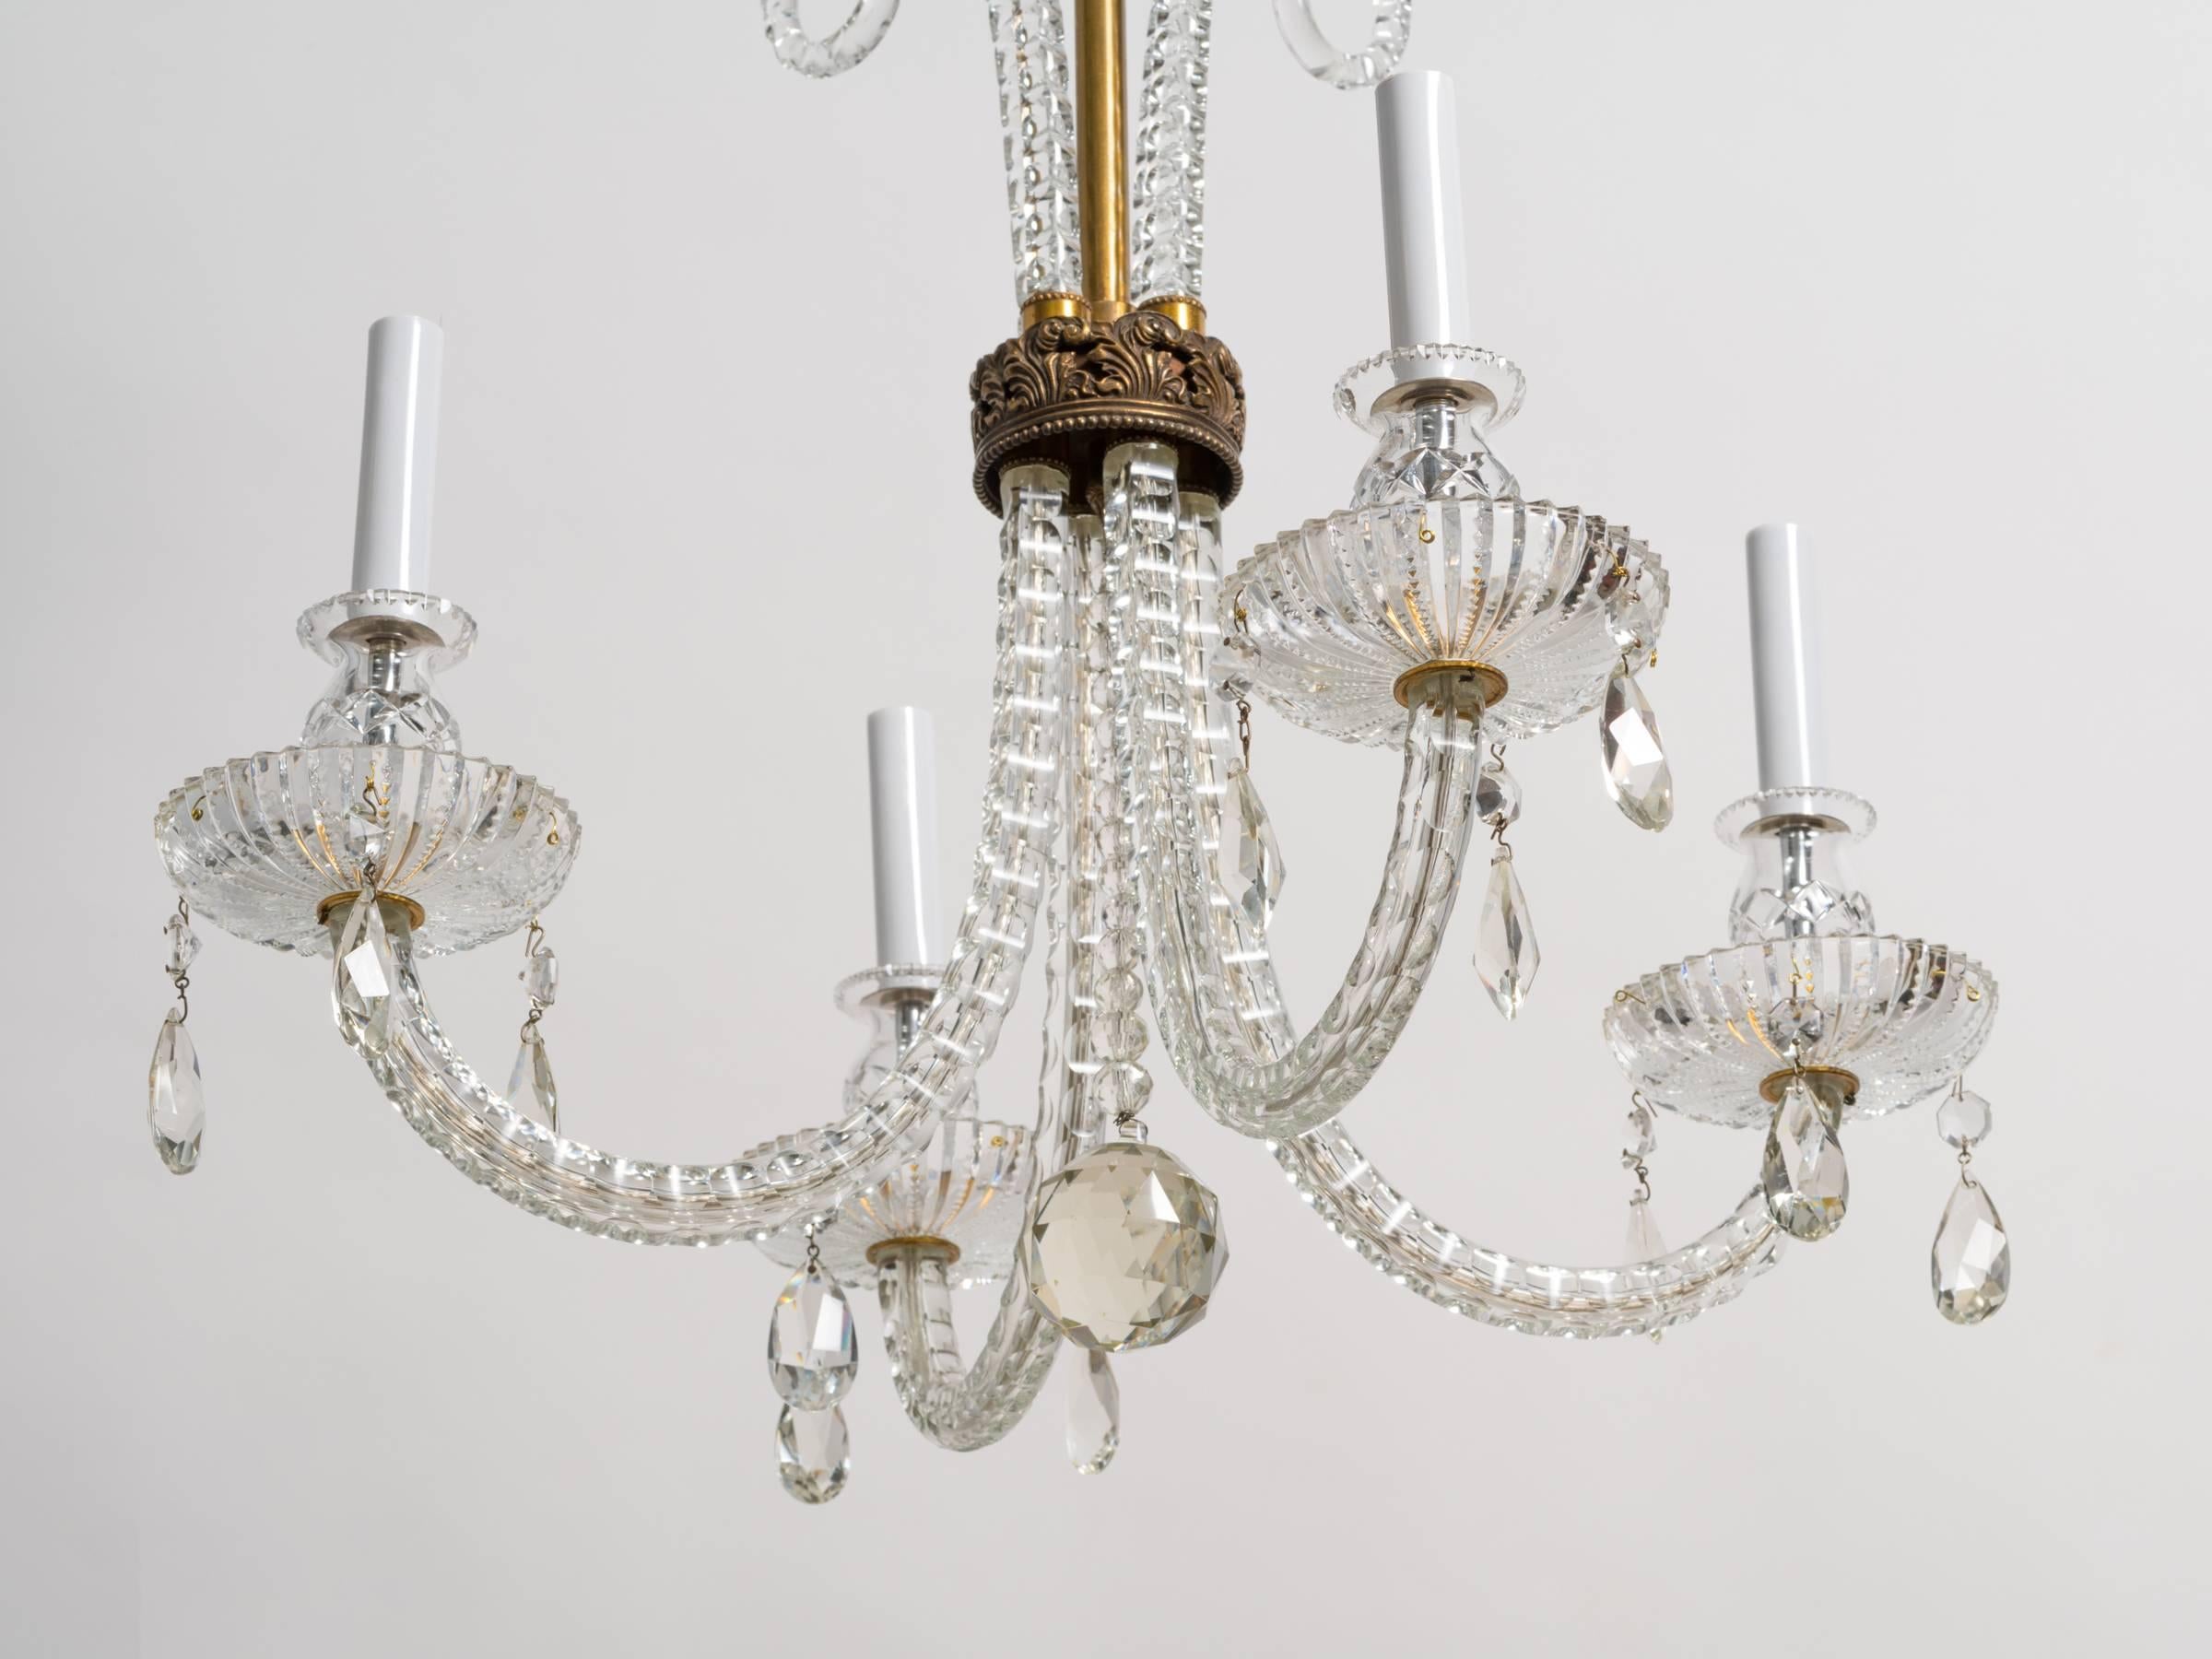 Rewired and cleaned, 1930s plume crystal chandelier.